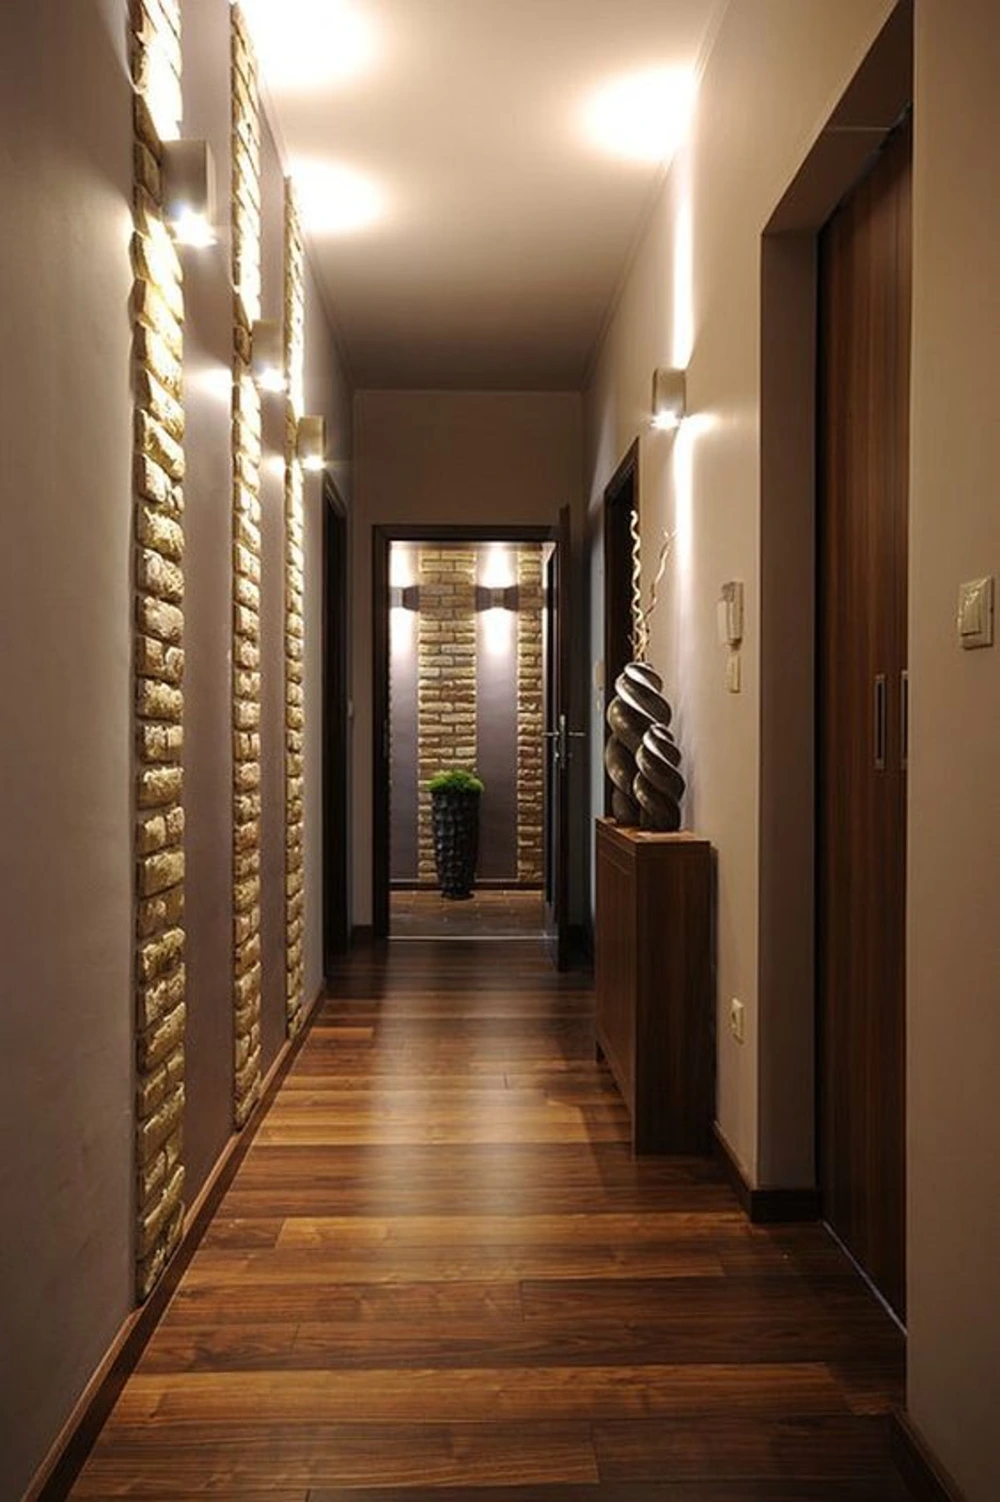 10 Hallway Designs You Can Be Inspired By For Your Home